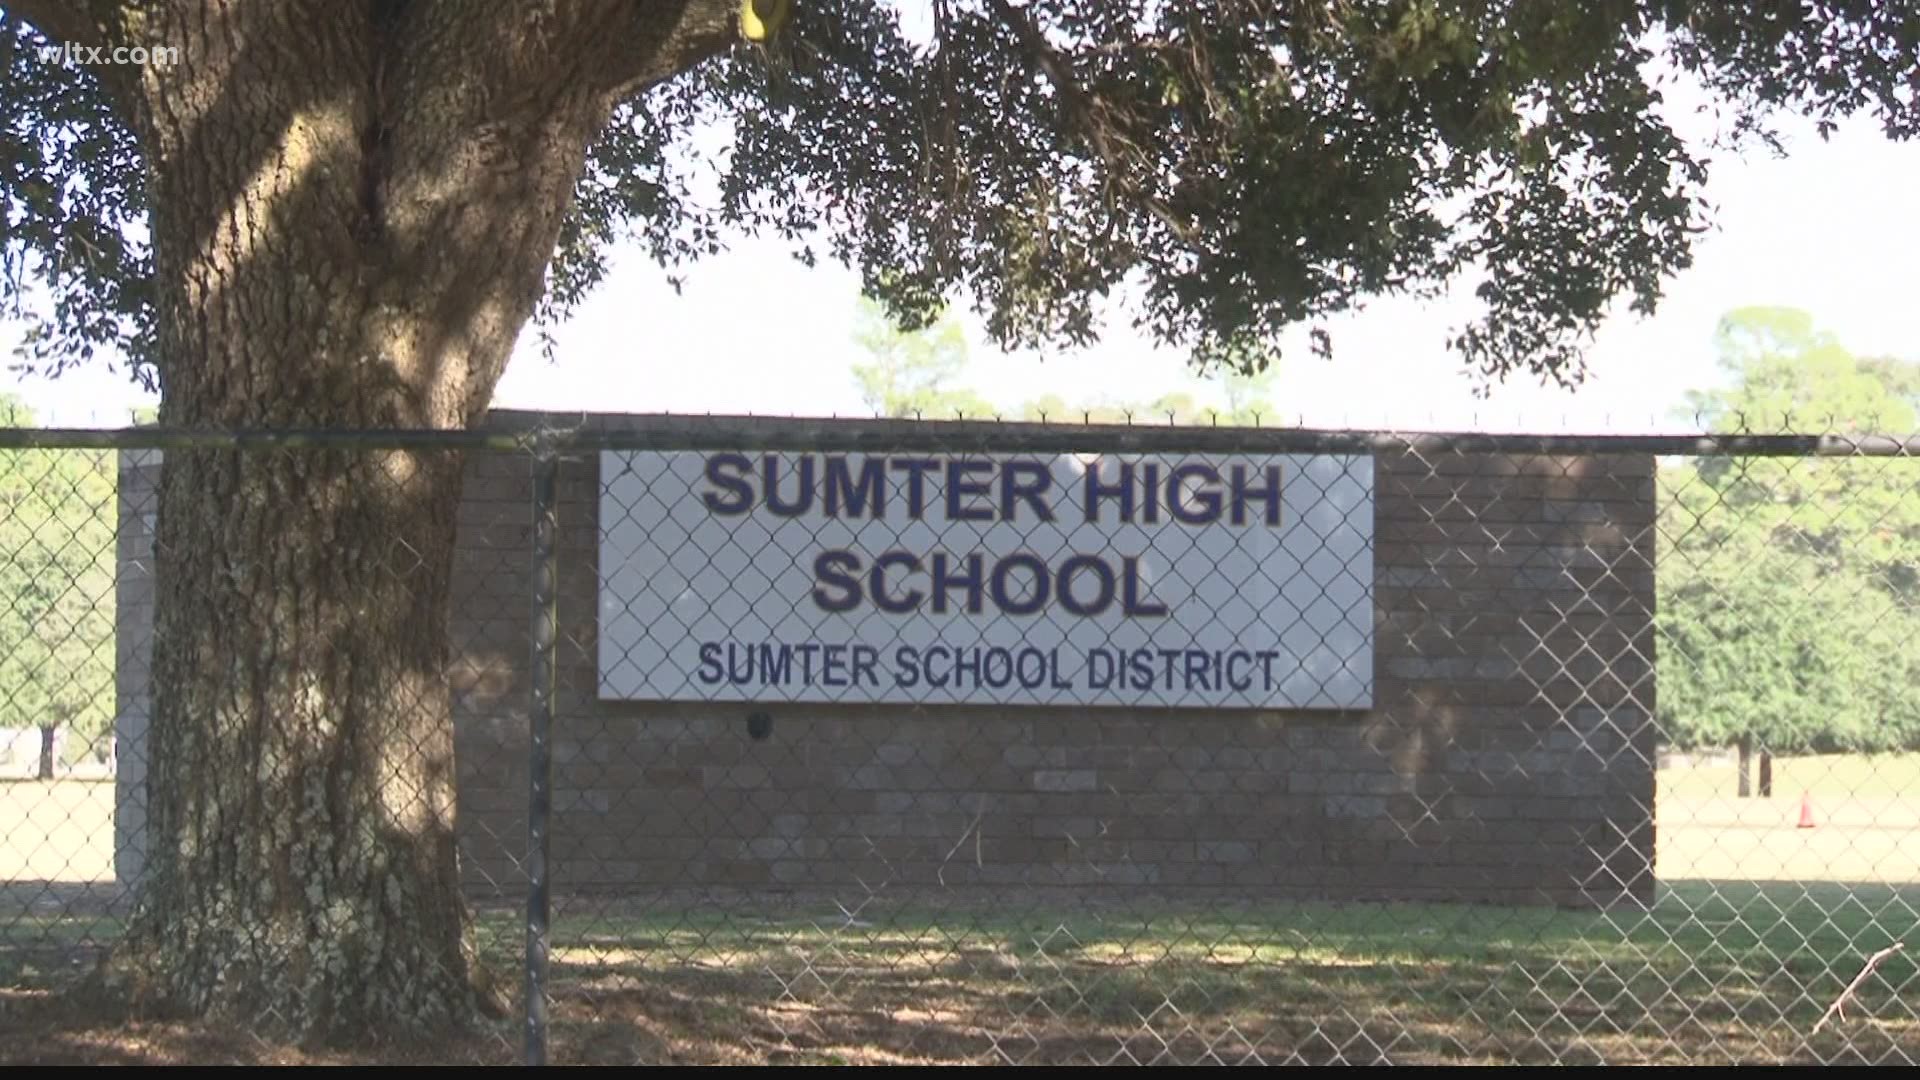 Sumter High & St. James' JV football teams remain in quarantine after multiple St. James players tested positive for COVID-19.